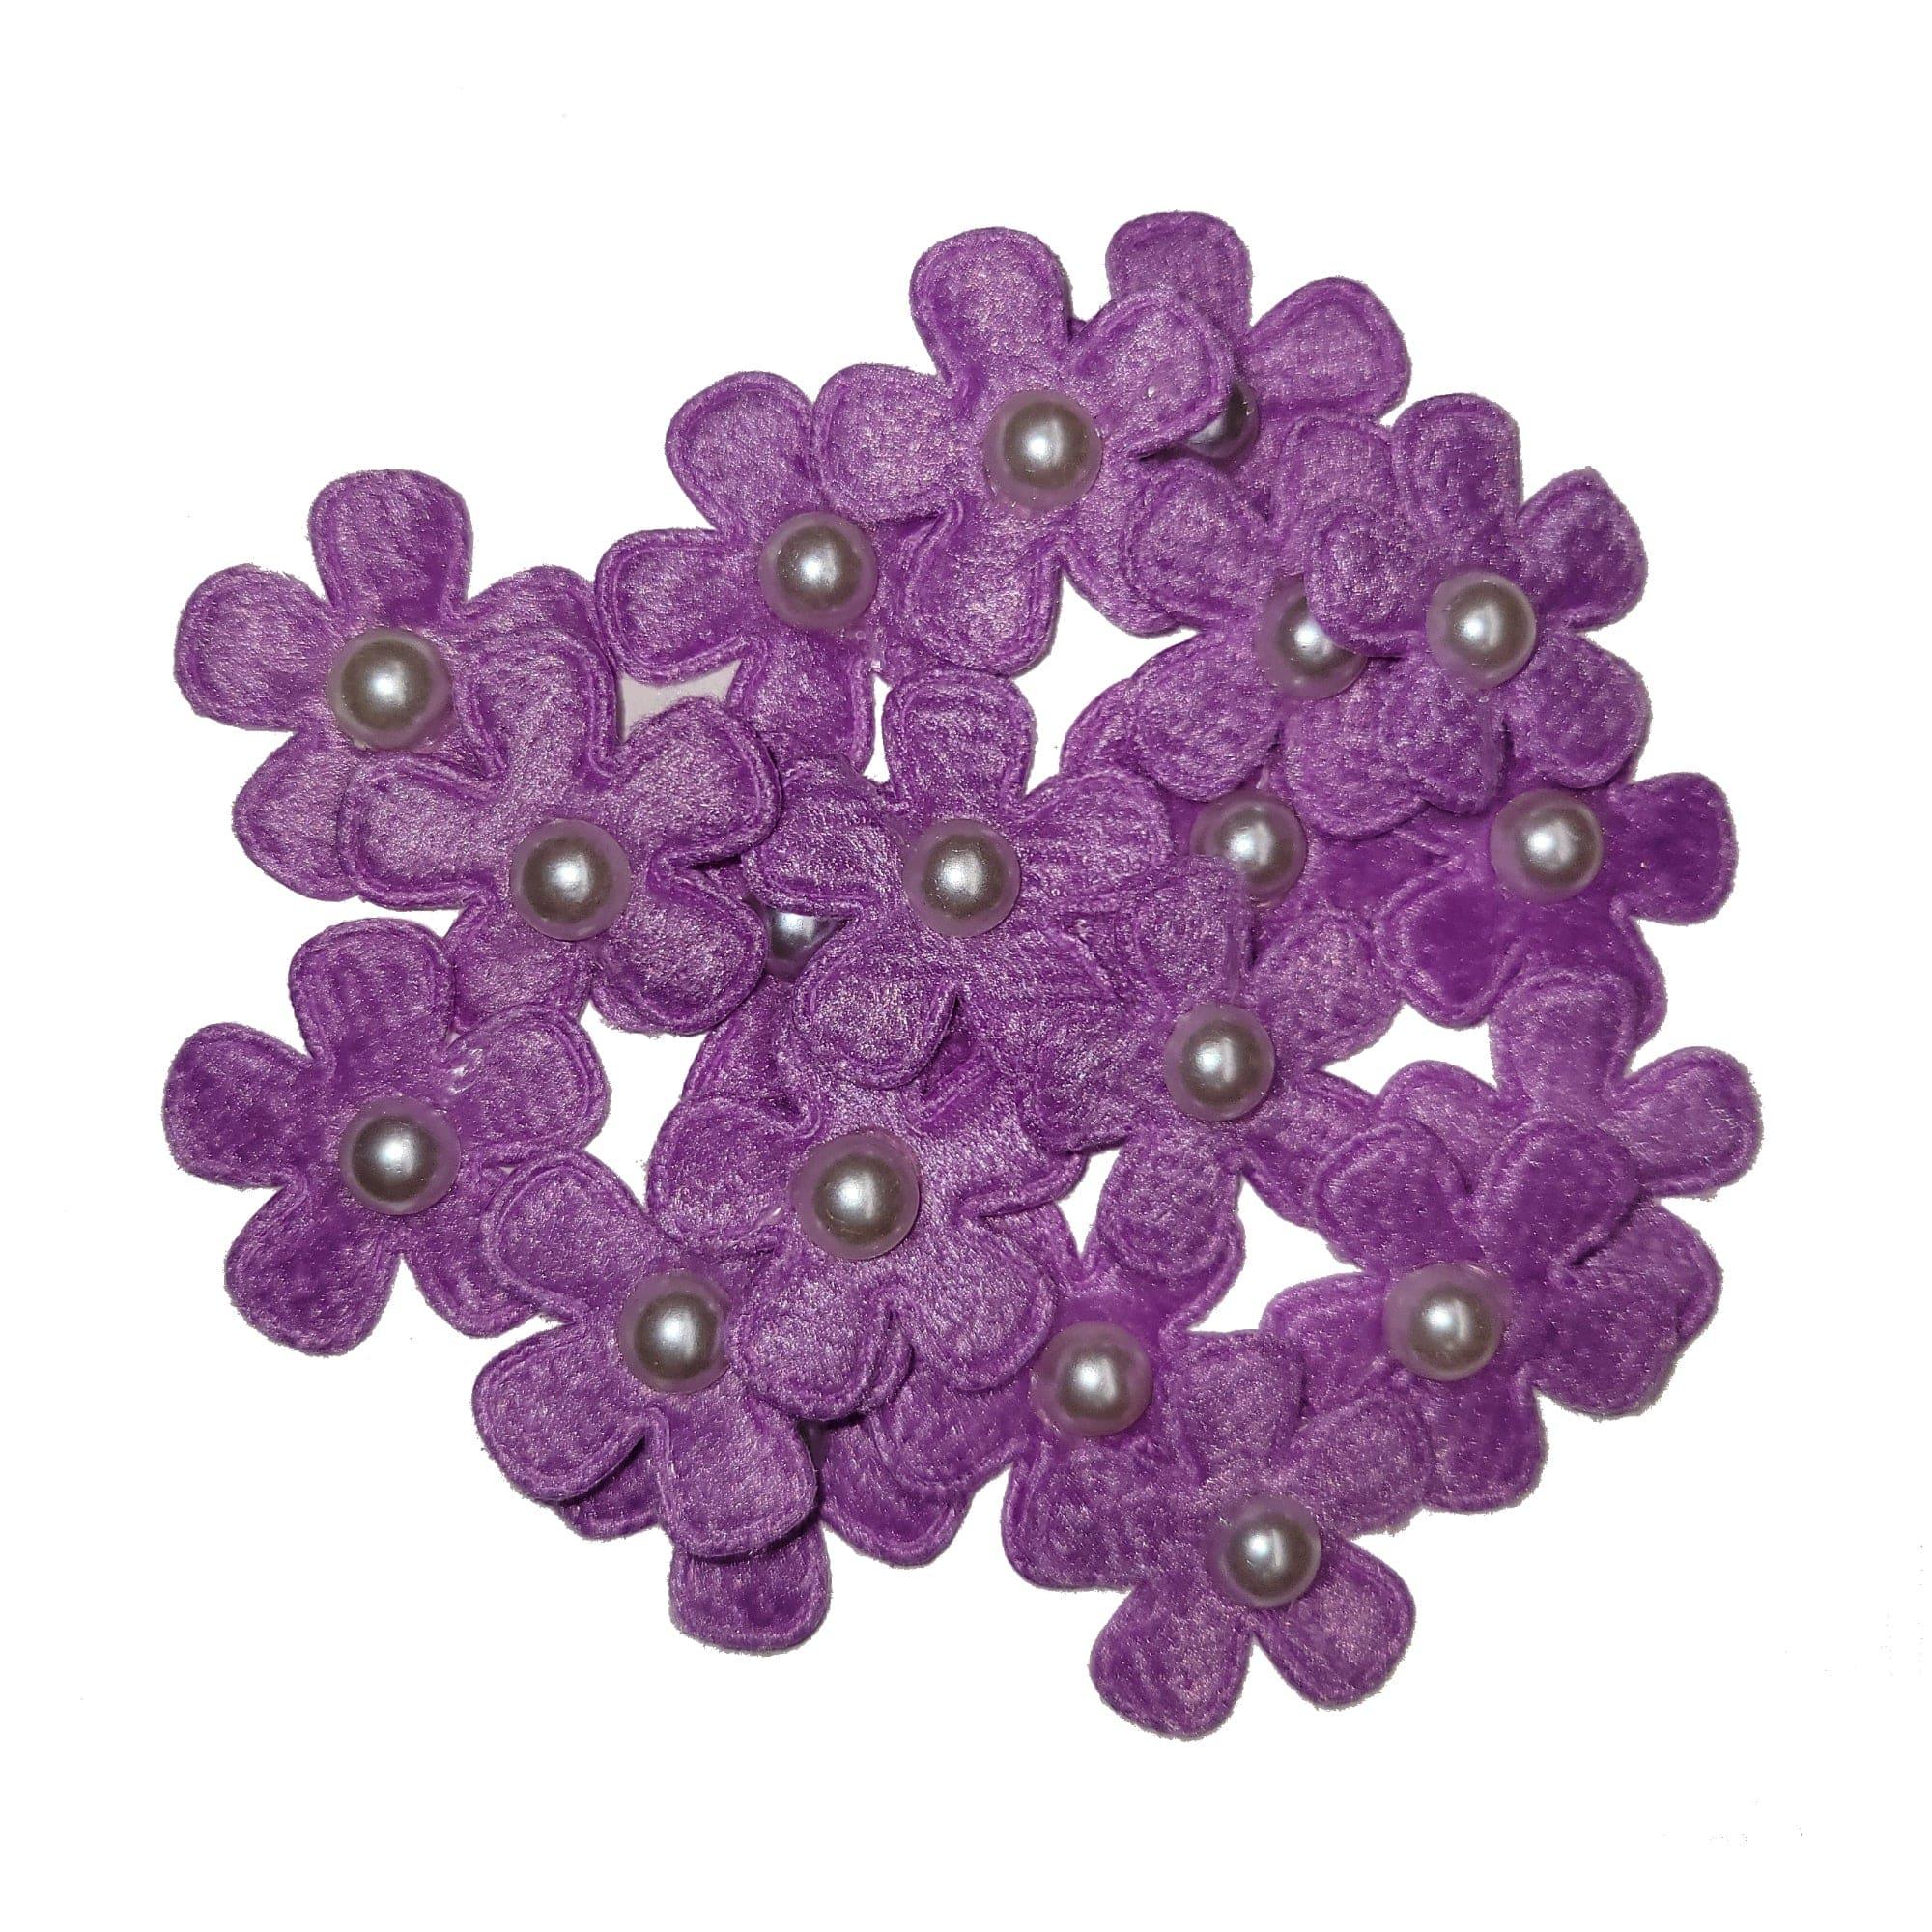 Pearl Petals Collection purple" Fabric Flowers with Pearl - Pkg. of 20 - Scrapbook Supply Companies